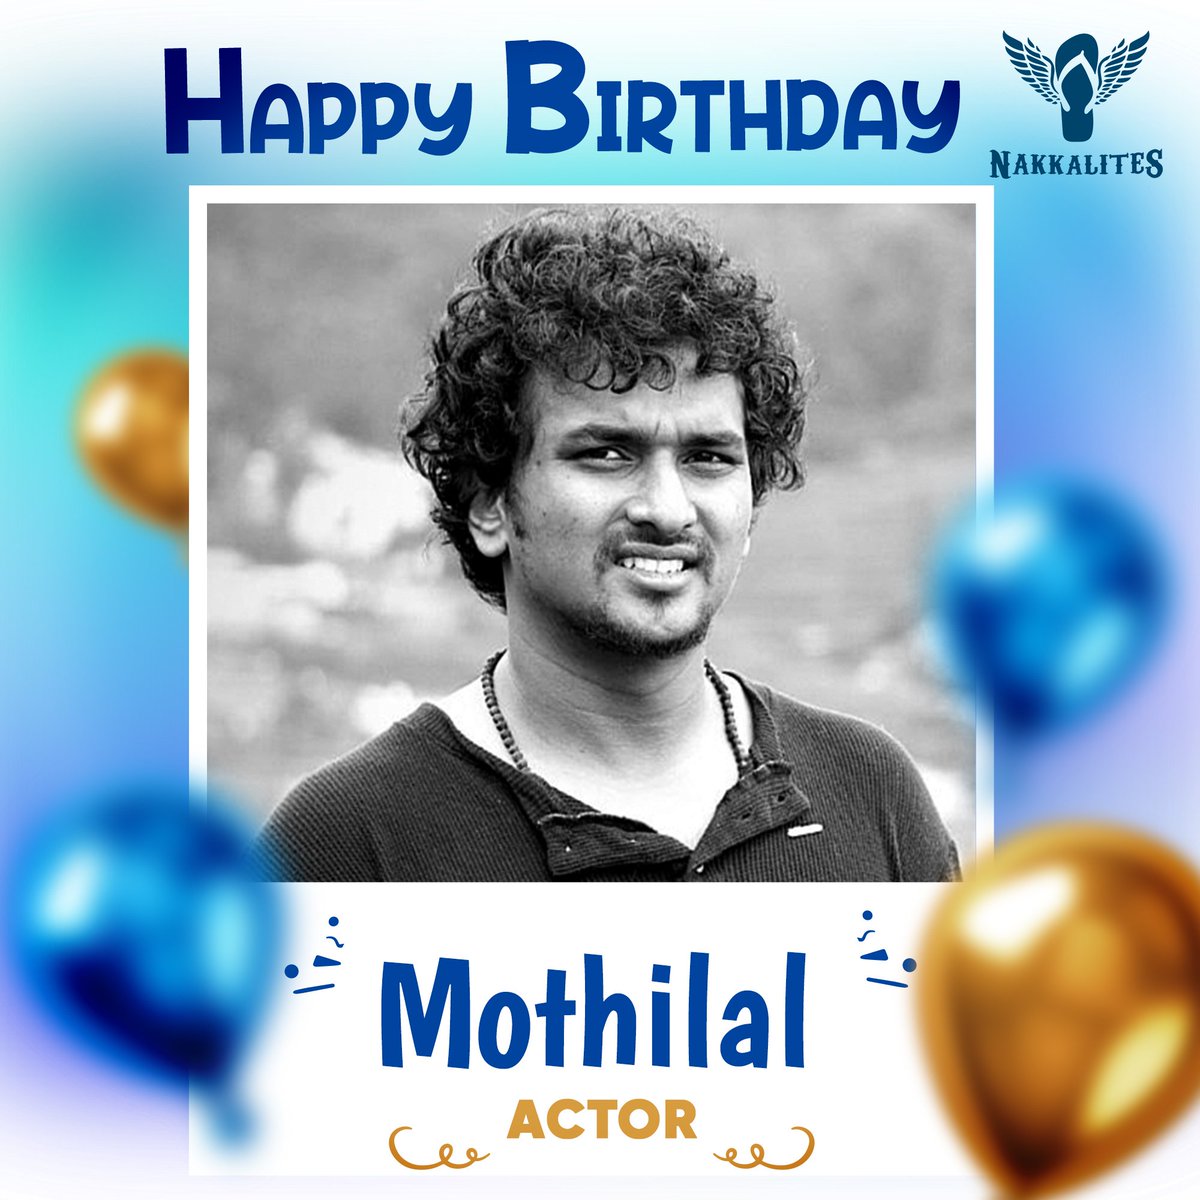 Wishing you all the great things in life. Hope this day will bring you an extra share of all that makes you happiest. Happy birthday Mothilal #BirthdayBash #birthday #nakkalites_family💙 #happybirthday